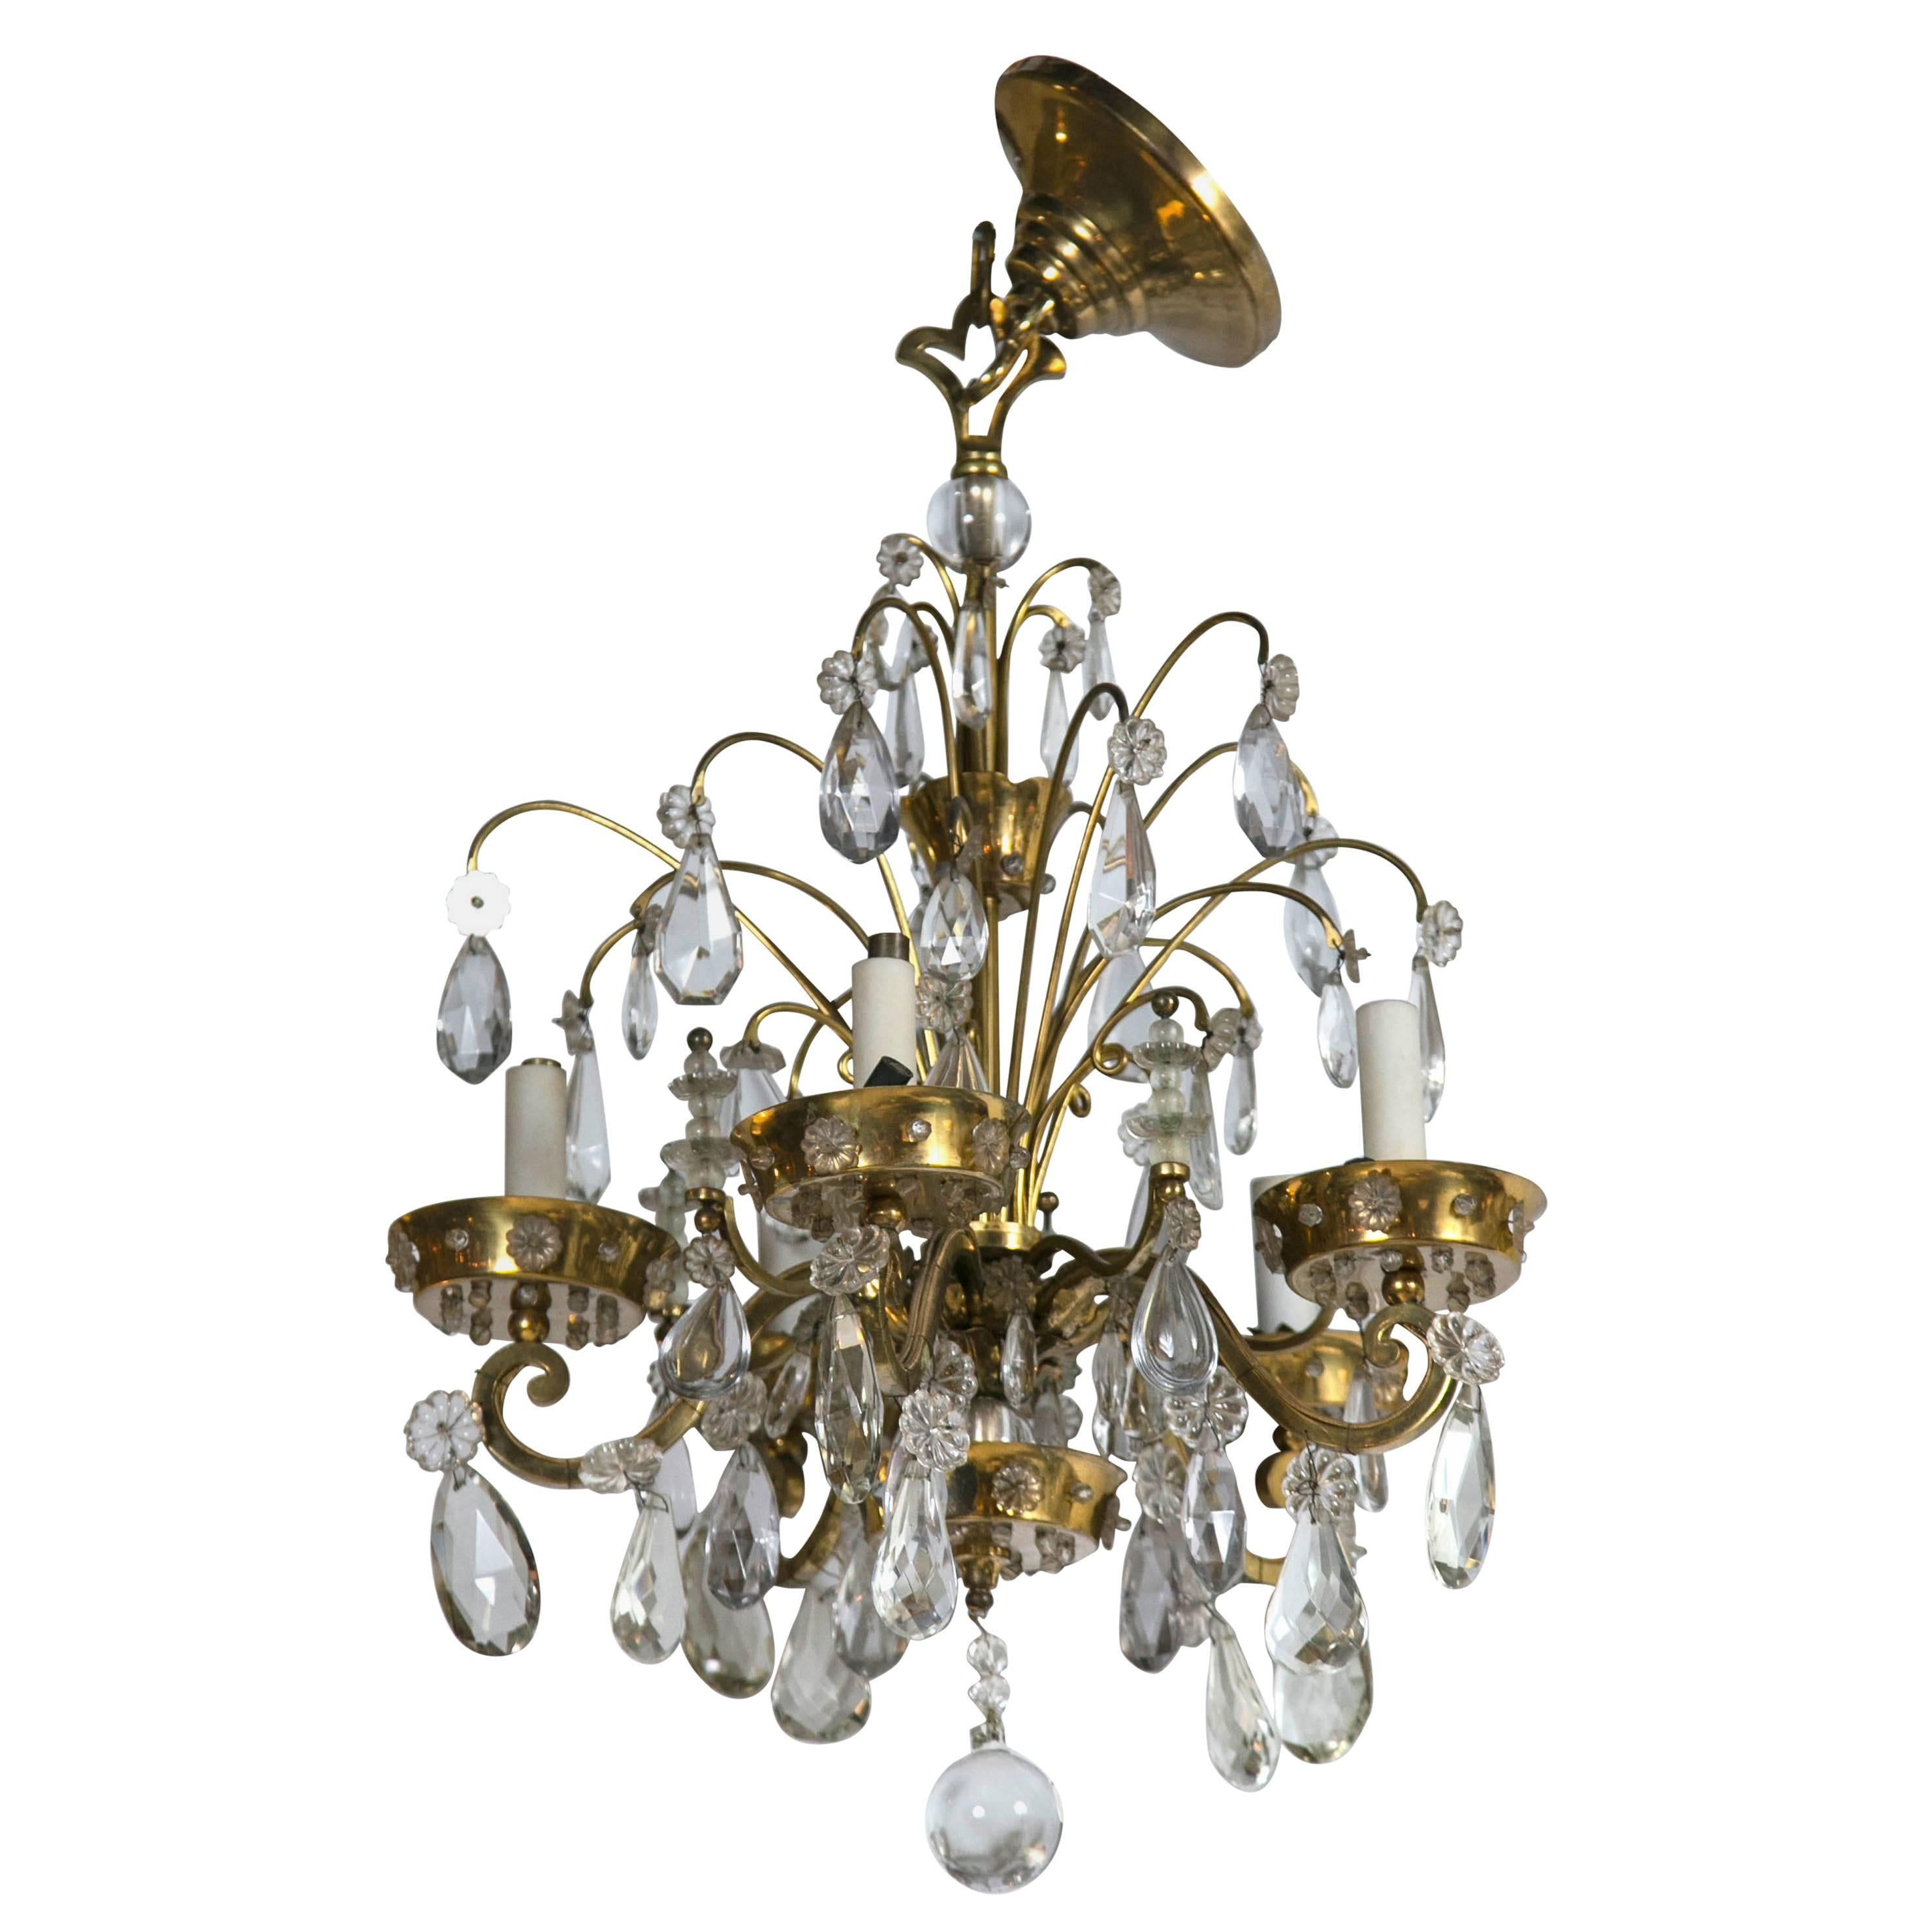 A Fine Bronze And Crystal French Art Deco Chandelier by Maison Jansen Five Arm